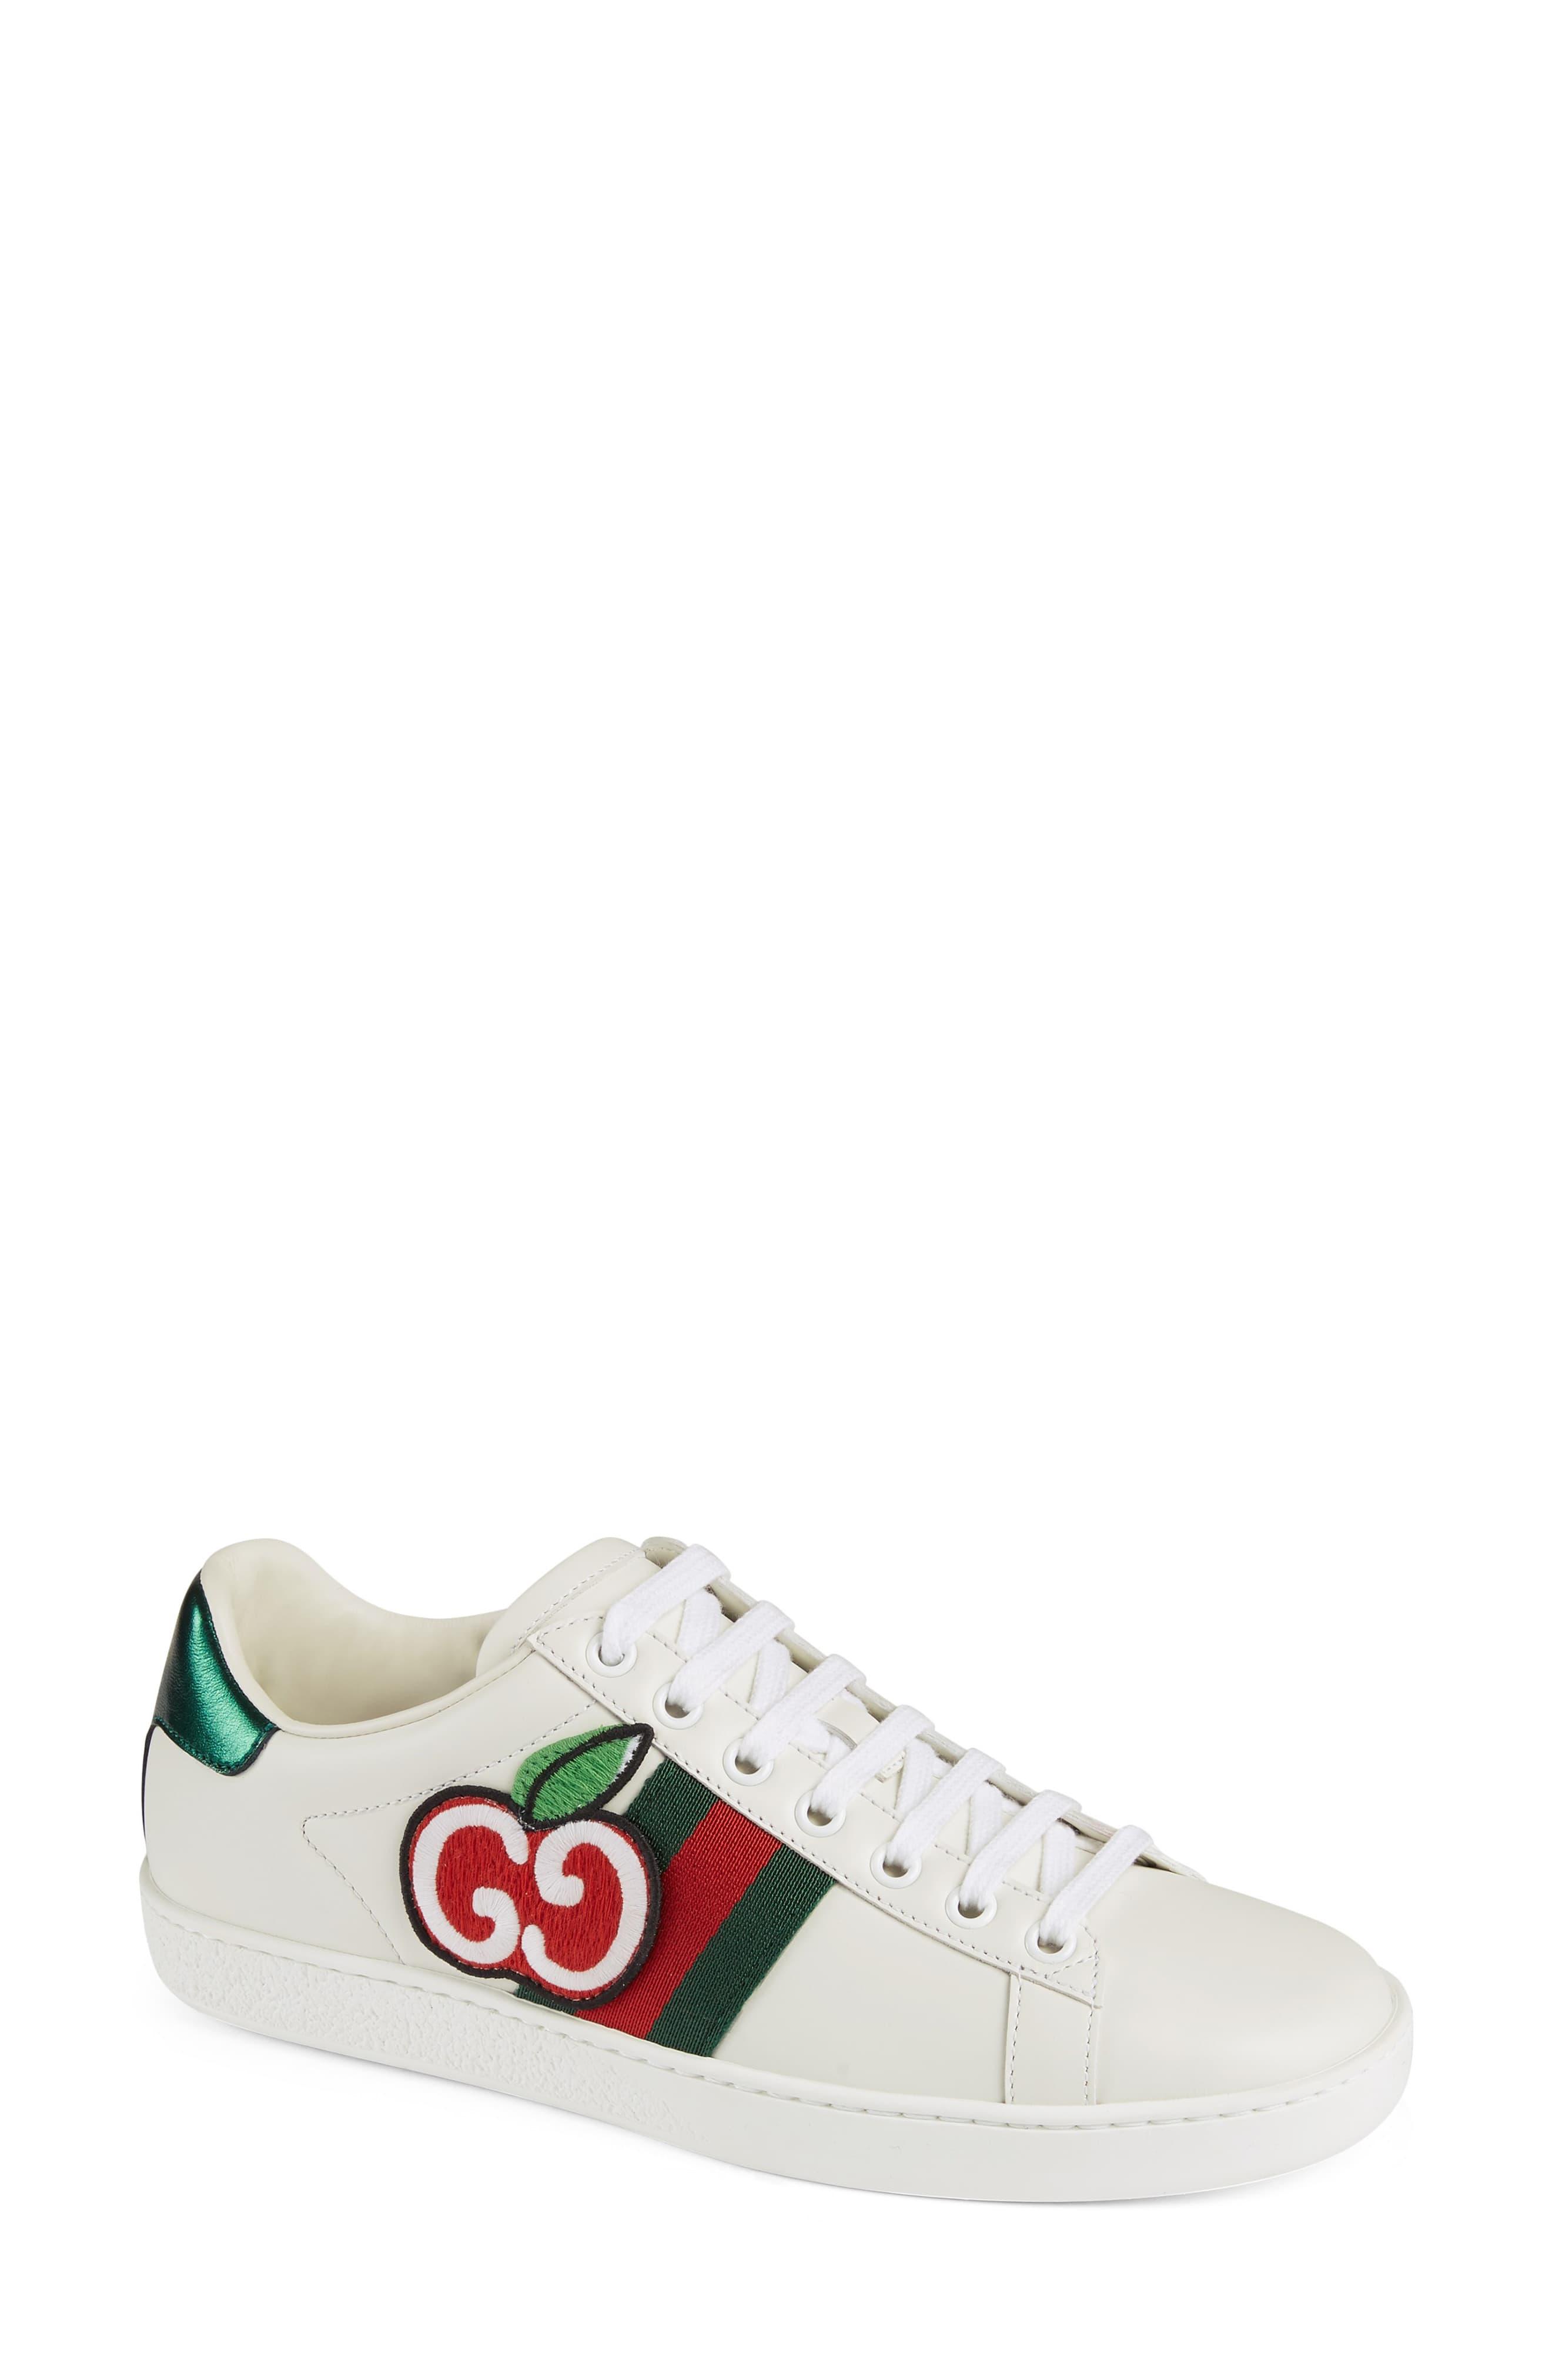 double g gucci shoes